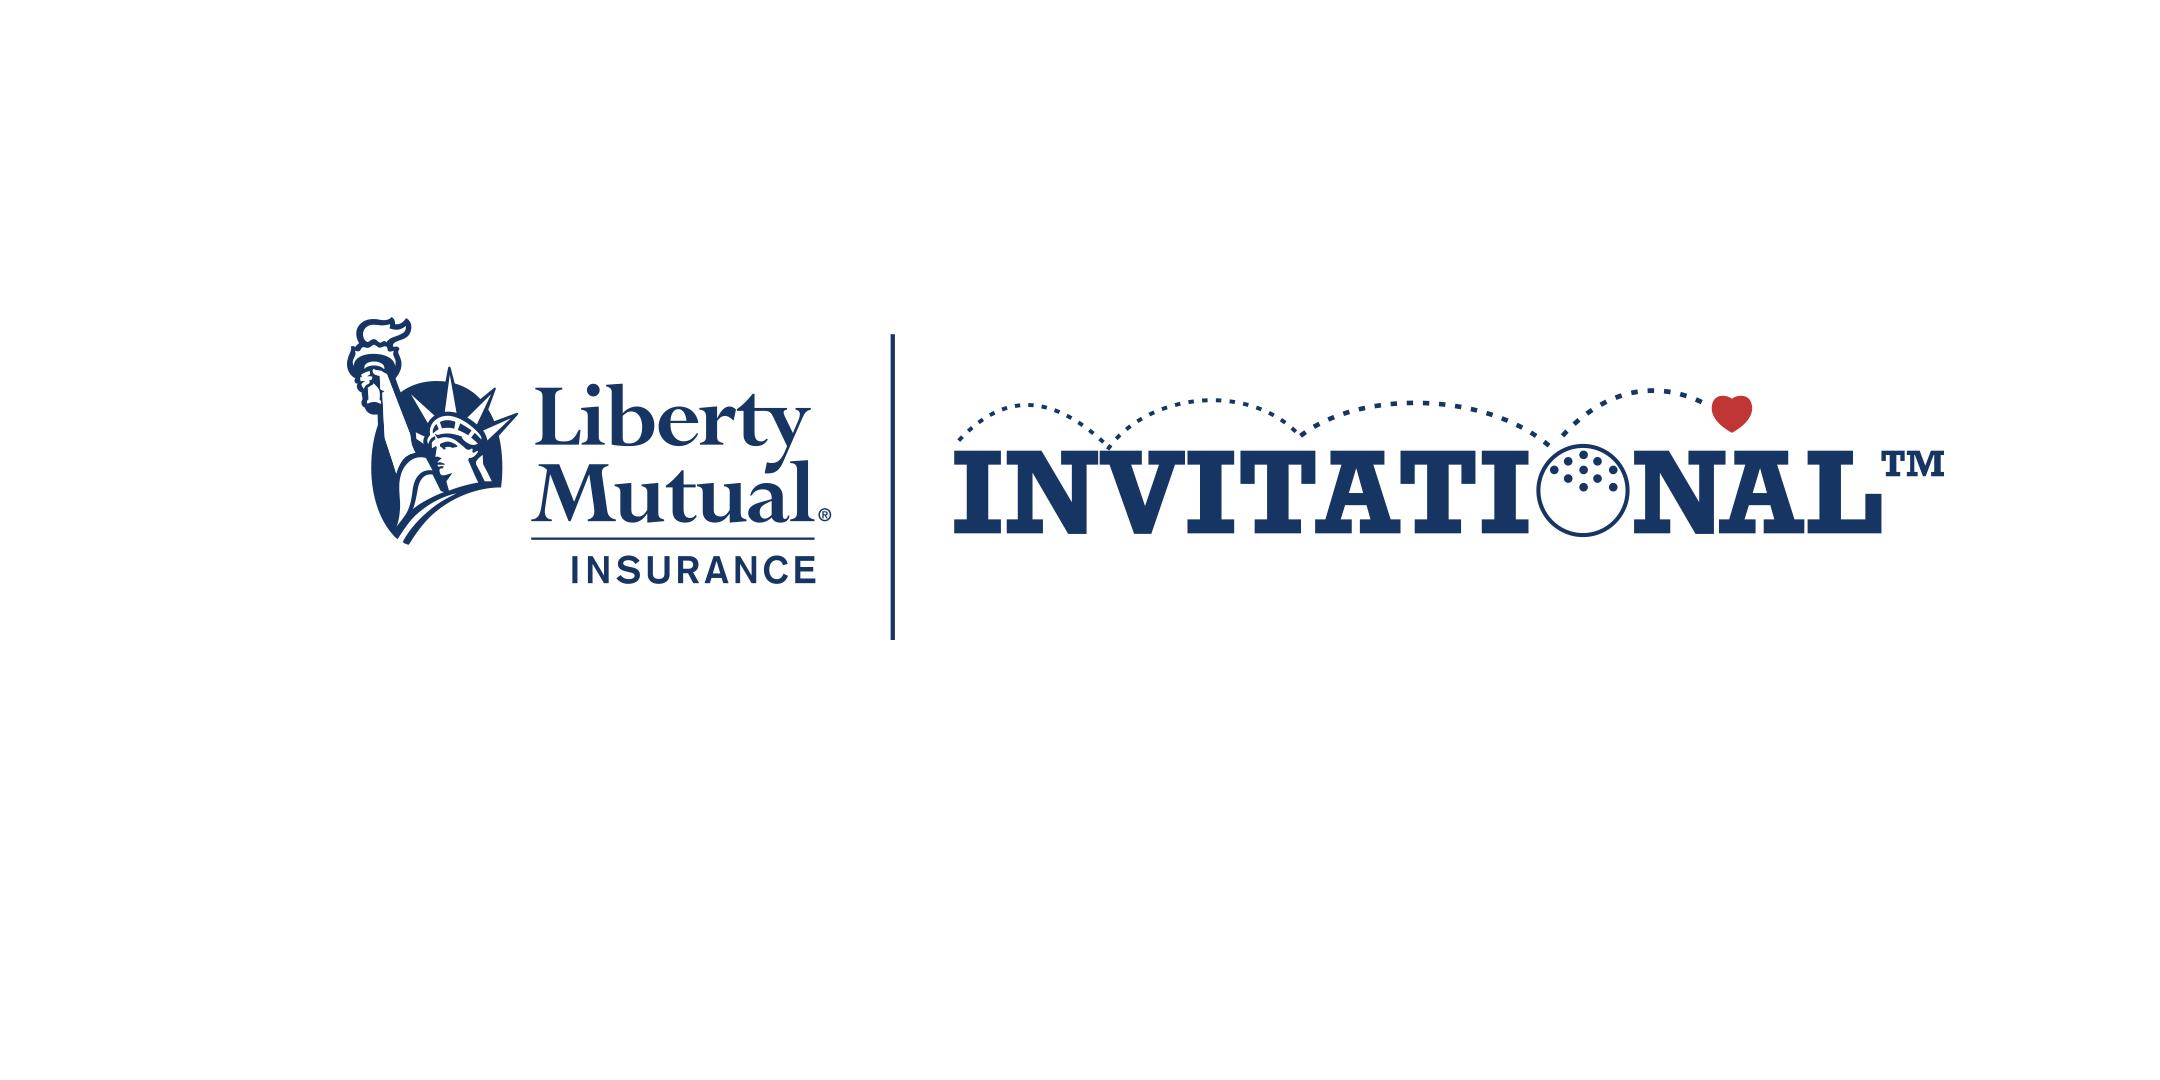 2018 Liberty Mutual Invitation benefiting the Edible Indy Foundation